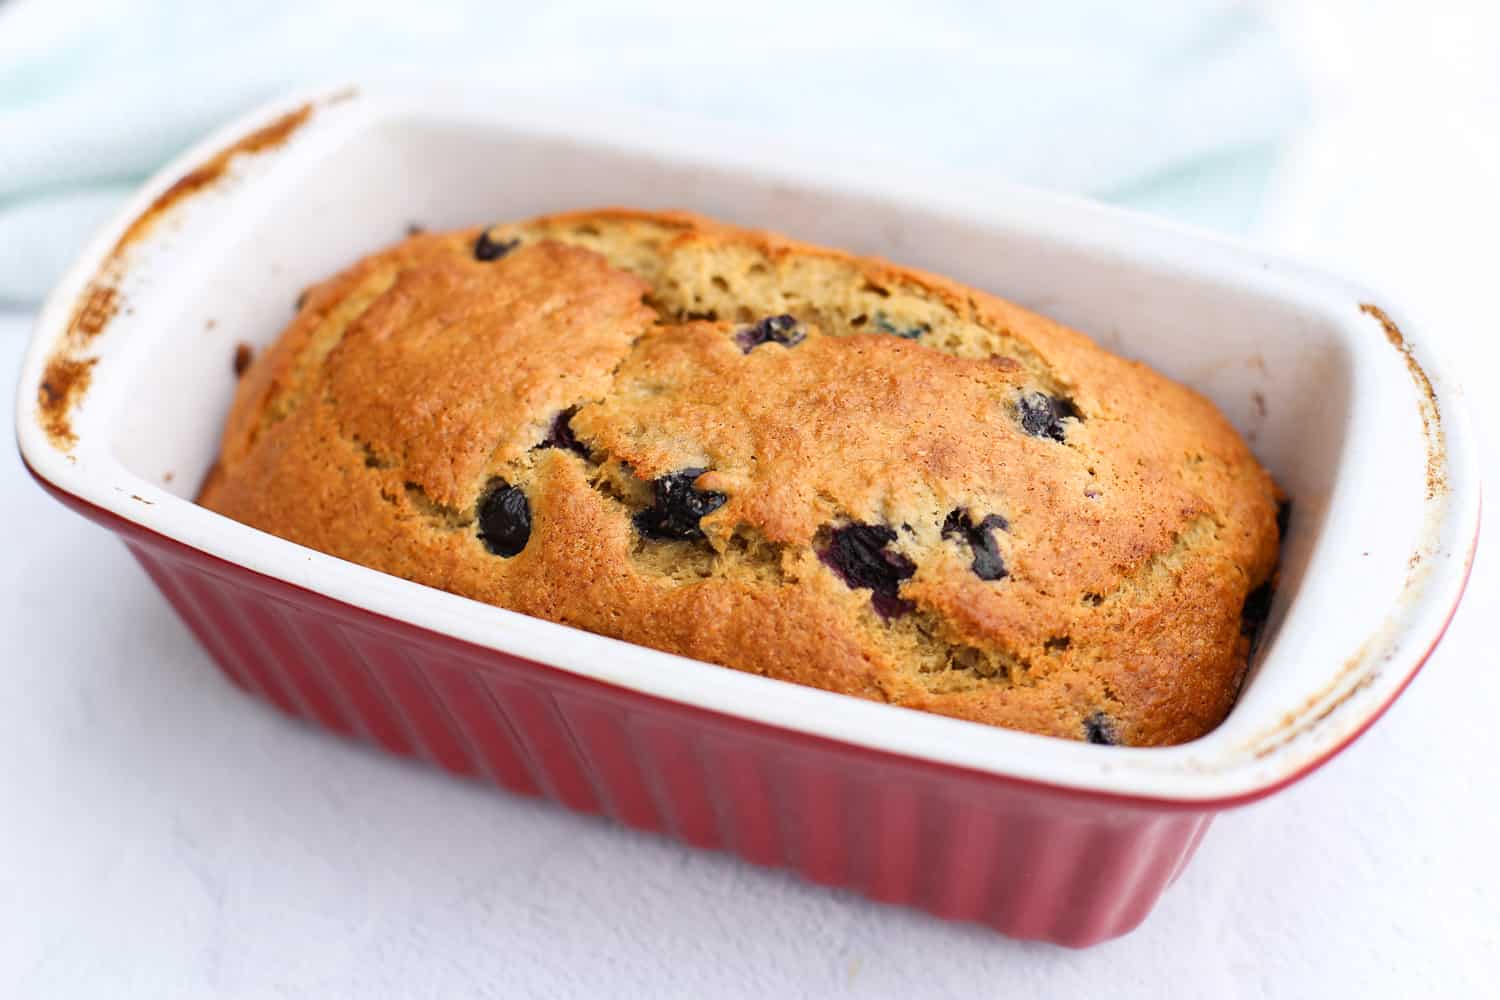 A loaf of cooked Blueberry Banana Bread in a red baking loaf dish